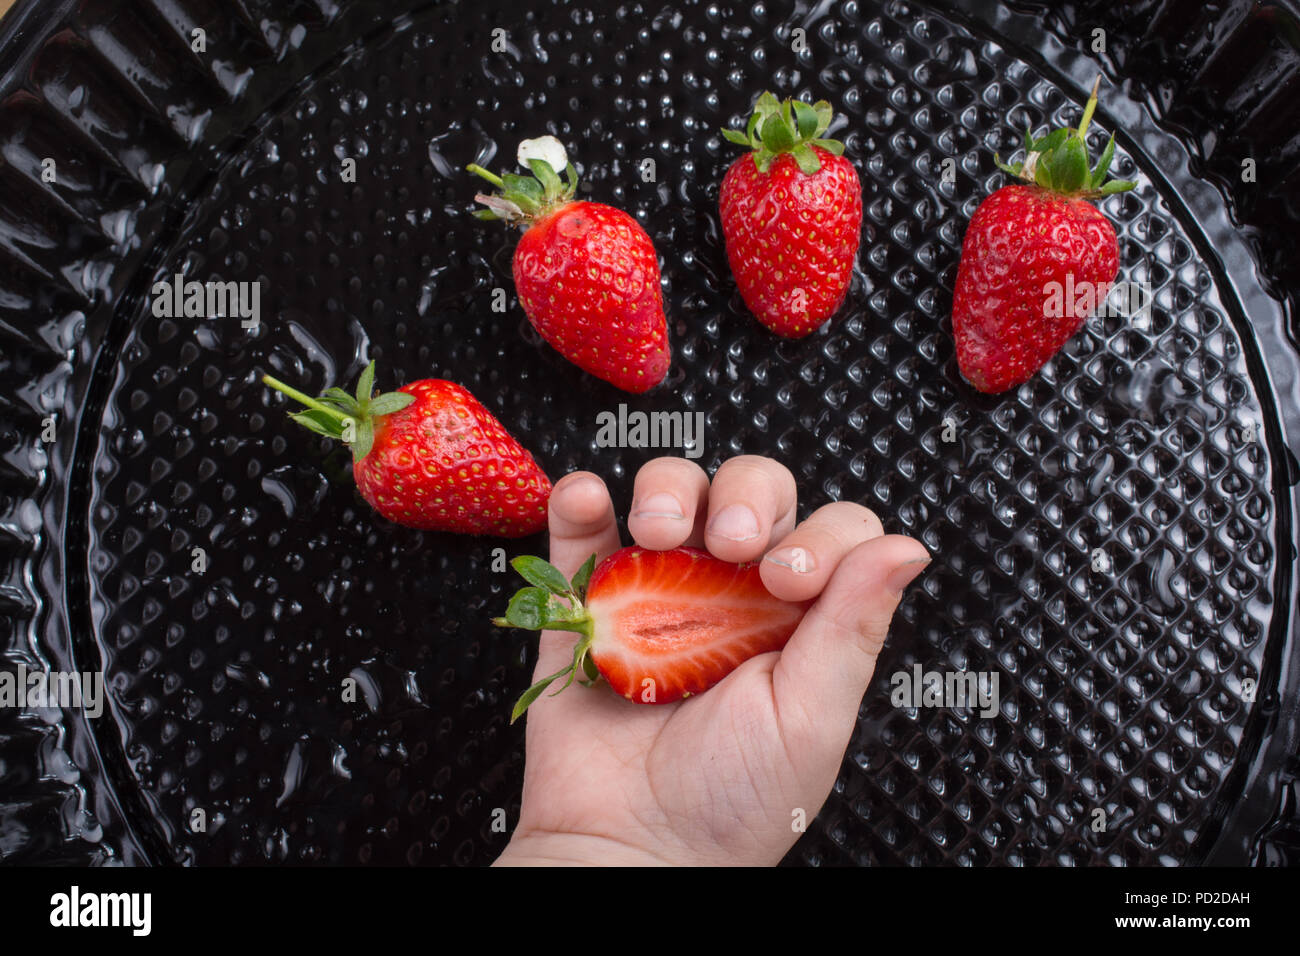 Juicy, sweet and ripe strawberry fruit in hand Stock Photo